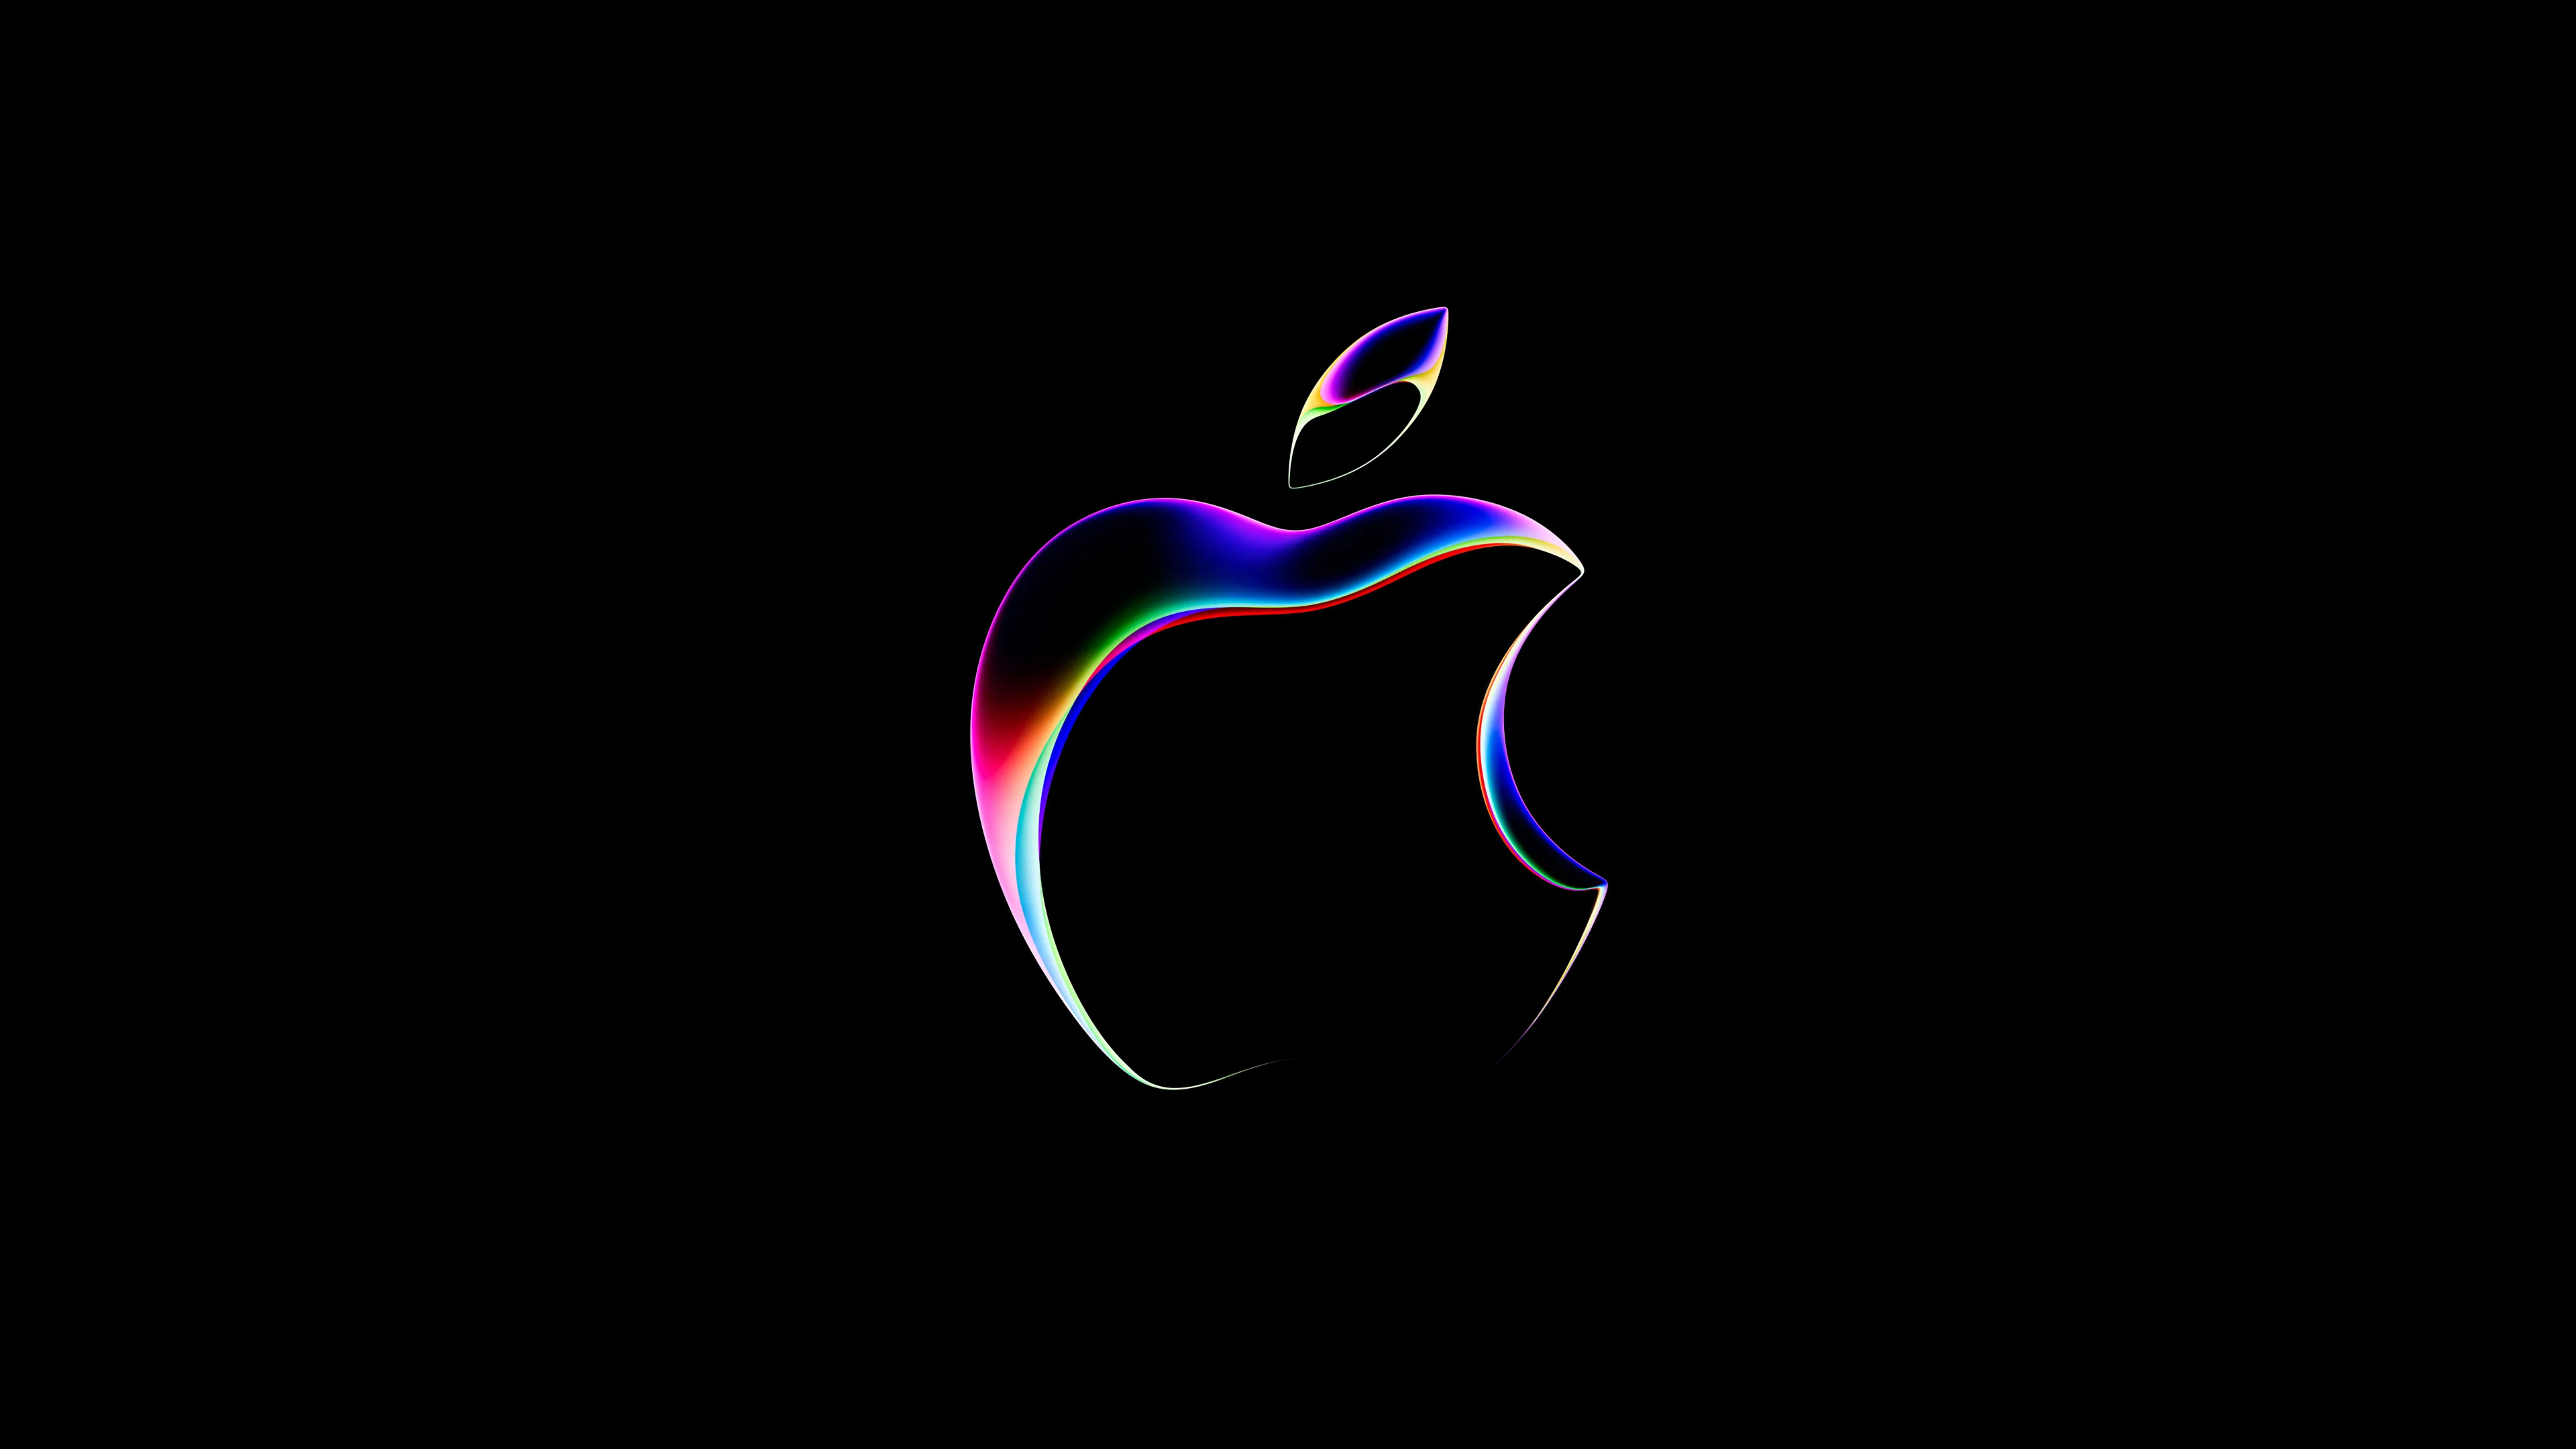 A stunning 4K wallpaper featuring the Apple logo for WWDC 2023. This digital design showcases the iconic logo in high resolution, perfect for technology enthusiasts and fans of the annual conference.